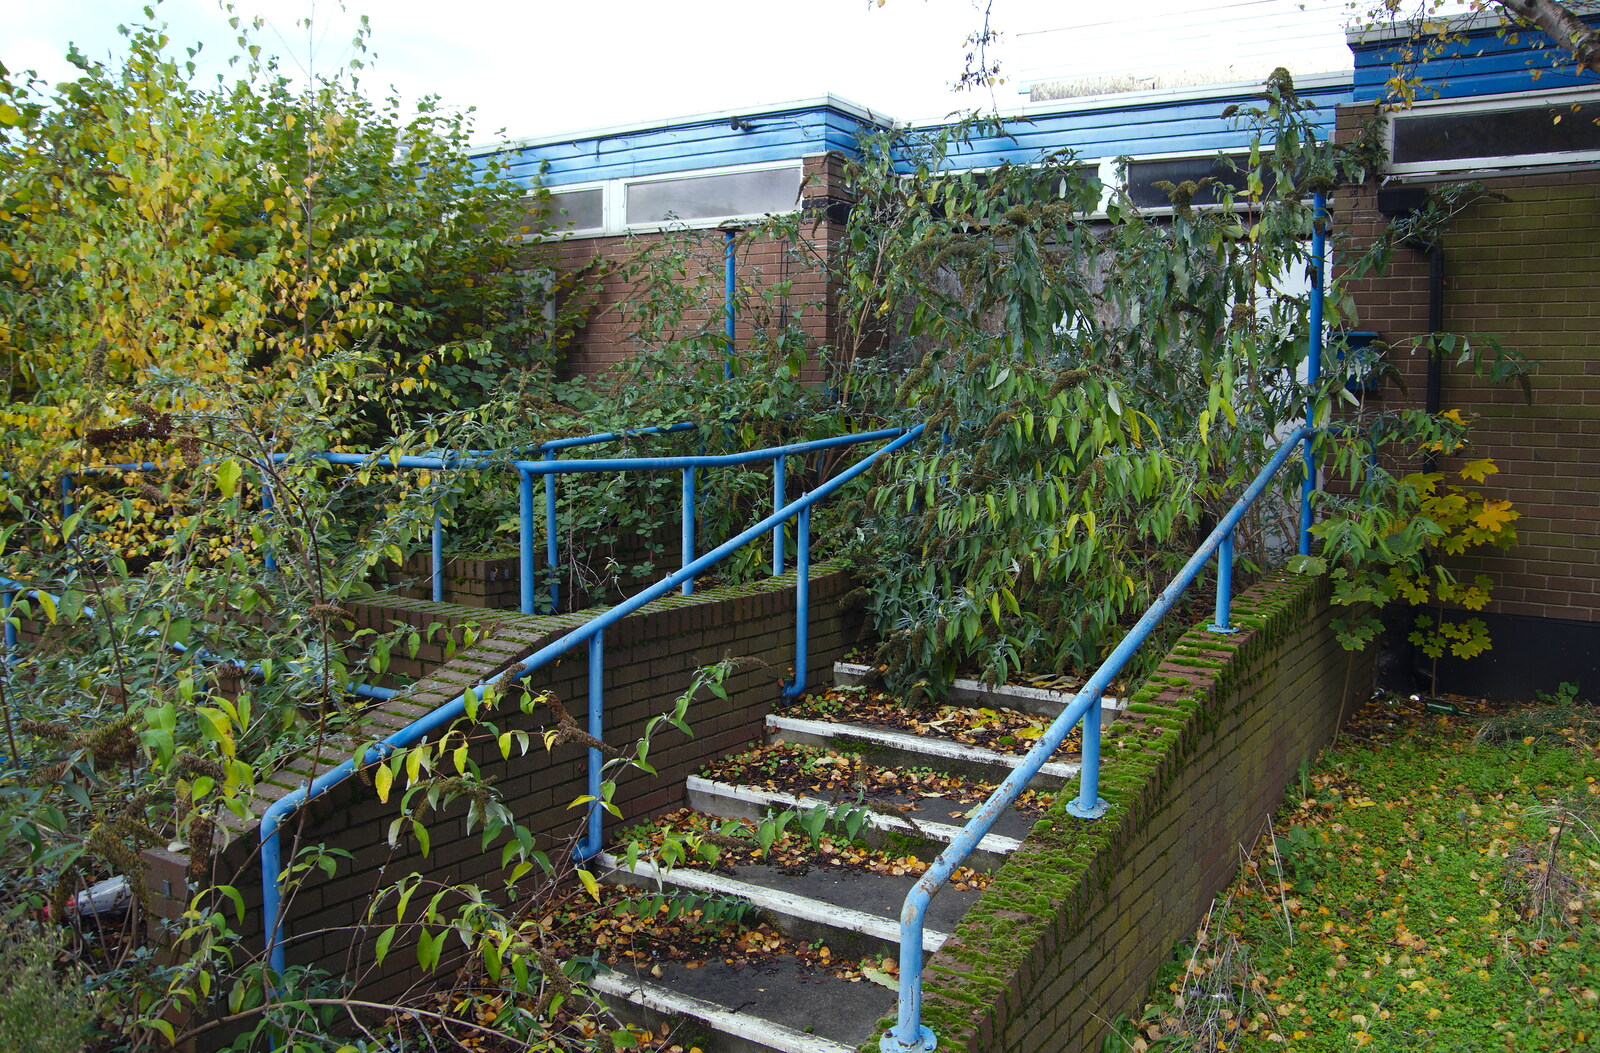 The steps are fairly overgrown from Exam Day Dereliction, Ipswich, Suffolk - 13th November 2019